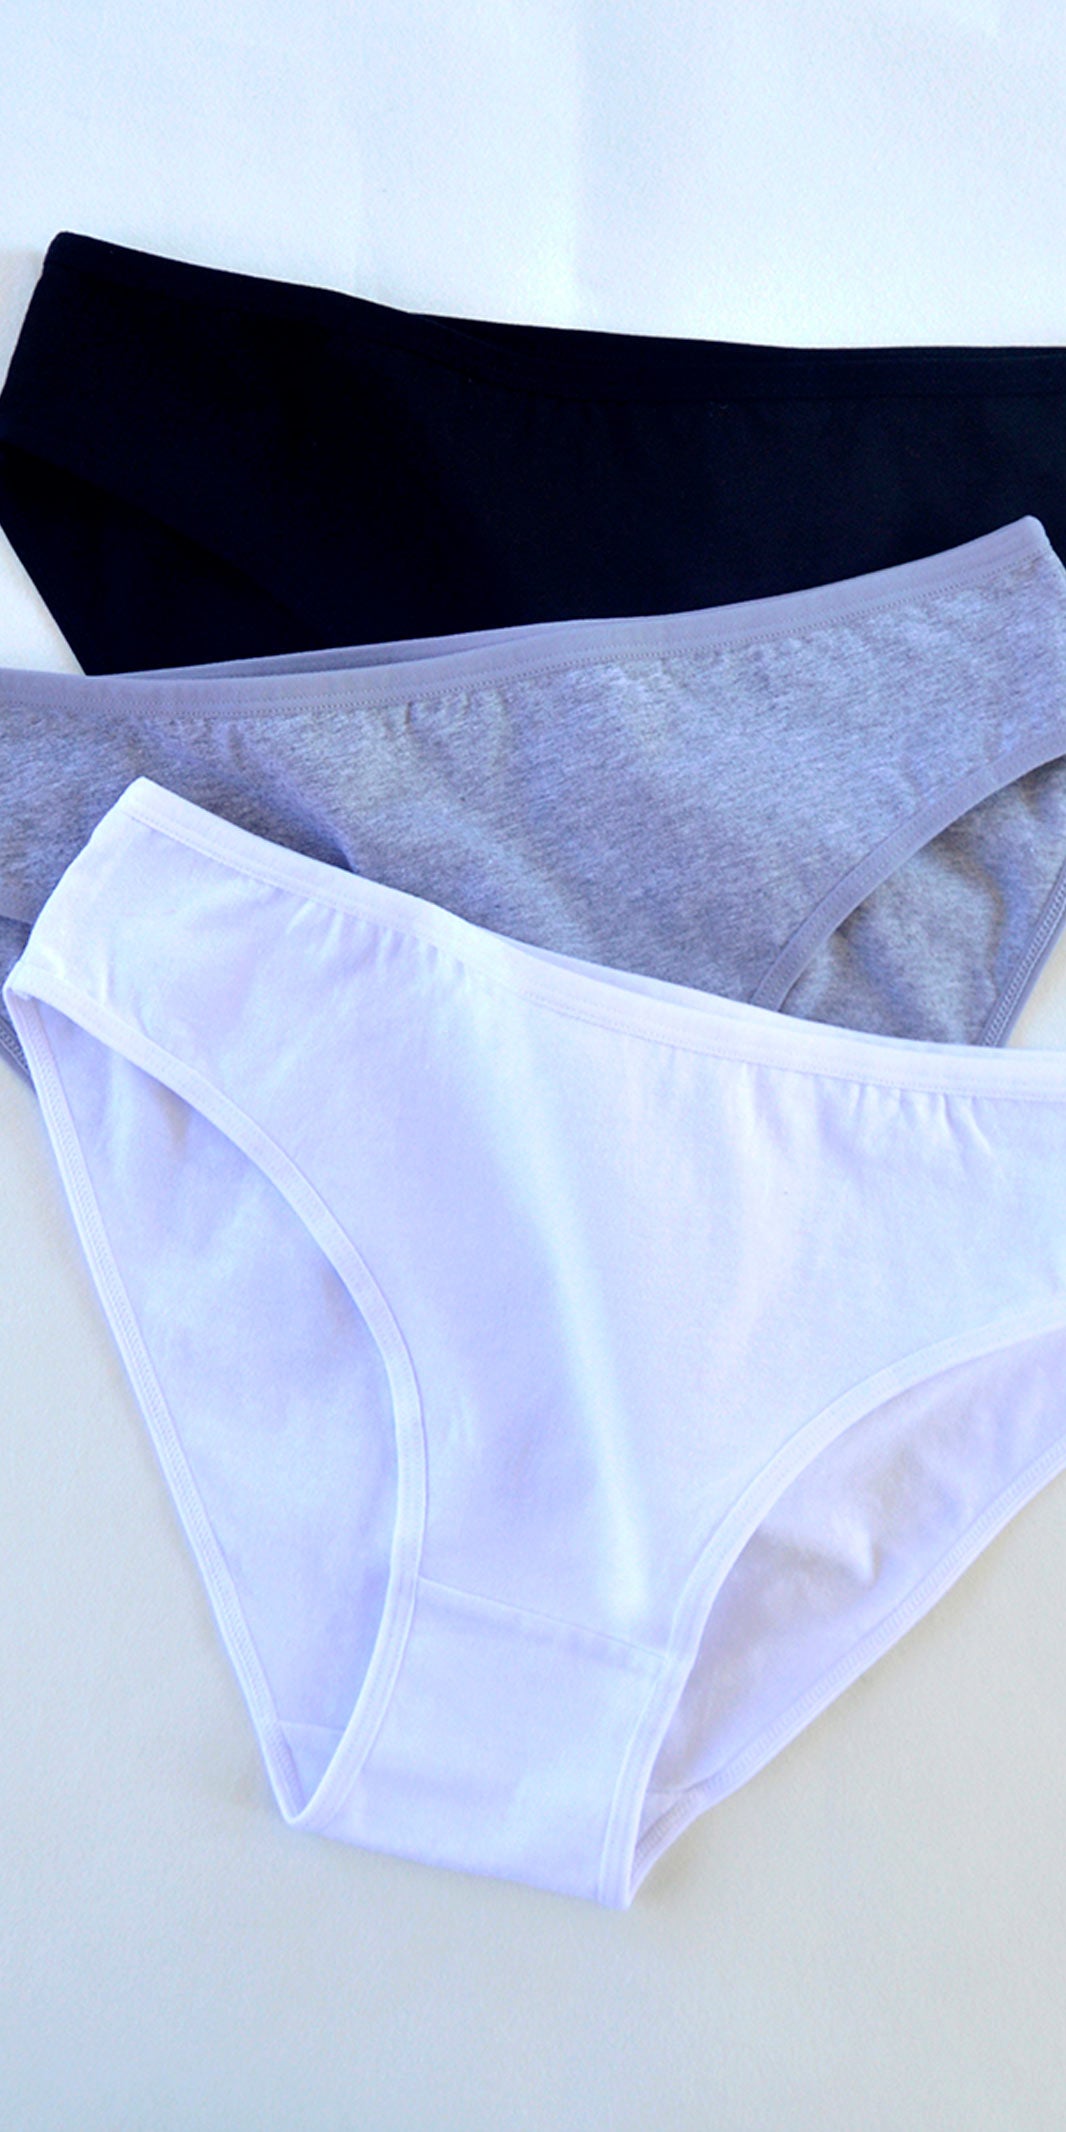 Mid-waist Simple And Elegant Pure Cotton Triangle Panties.